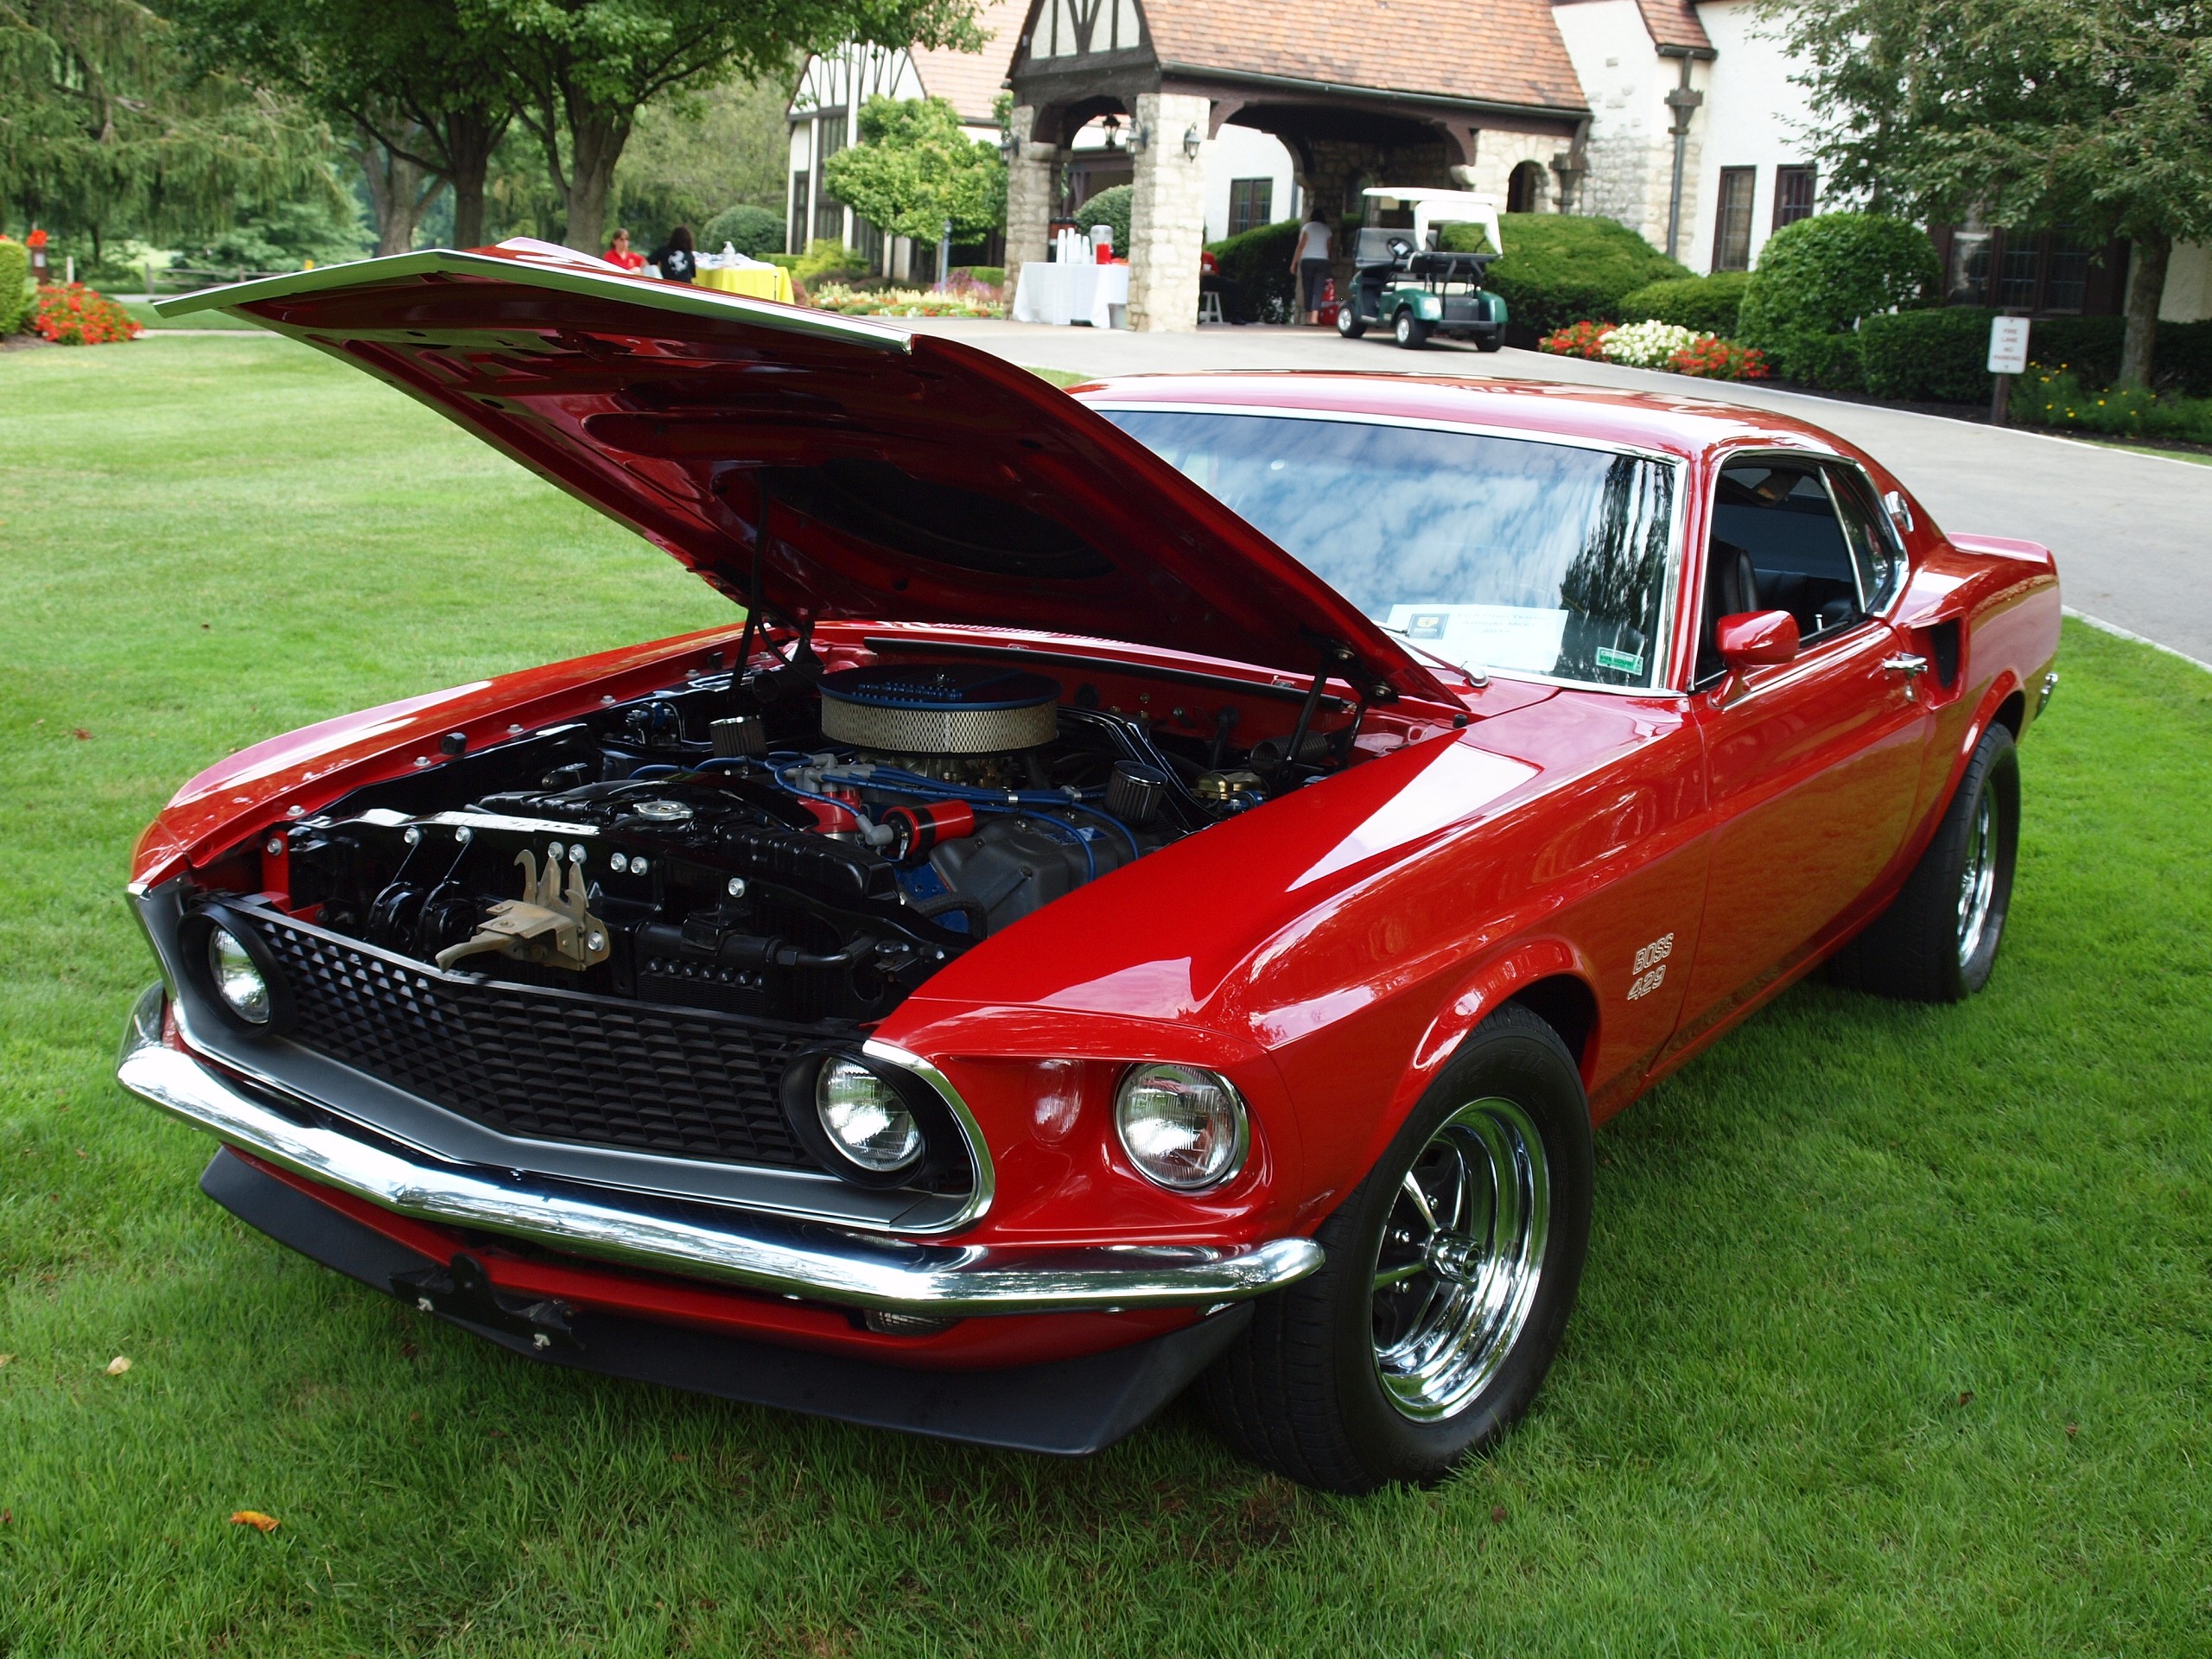 General 2560x1920 car vehicle Ford red cars Ford Mustang muscle cars American cars